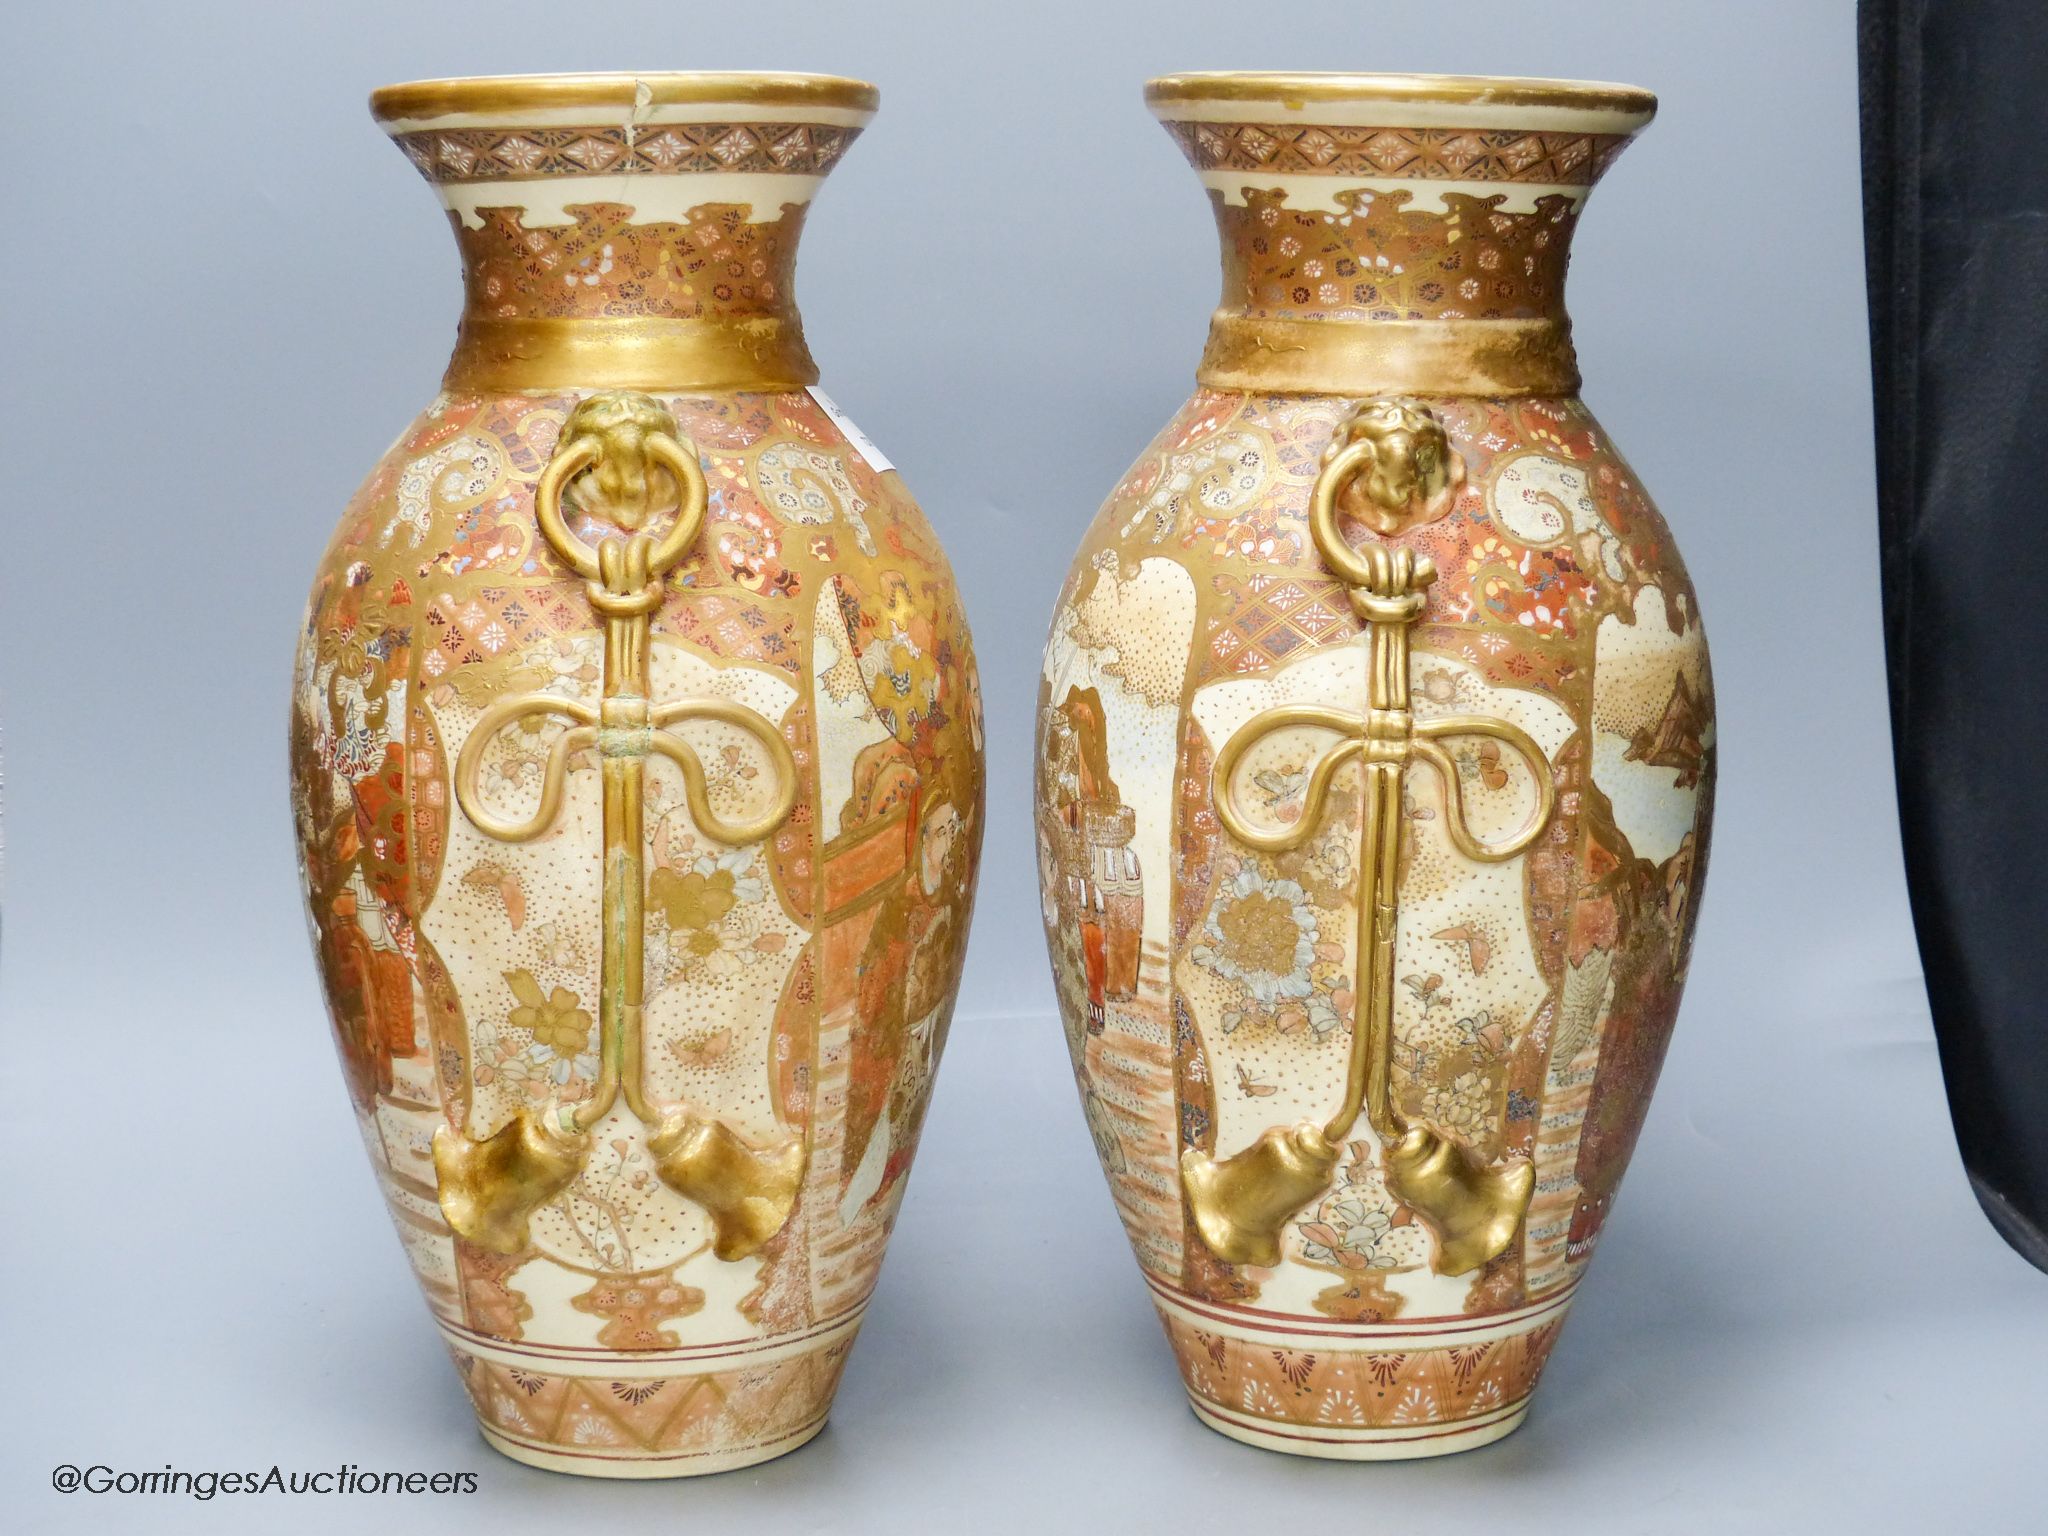 A pair of large Japanese Satsuma baluster vases, height 39cm